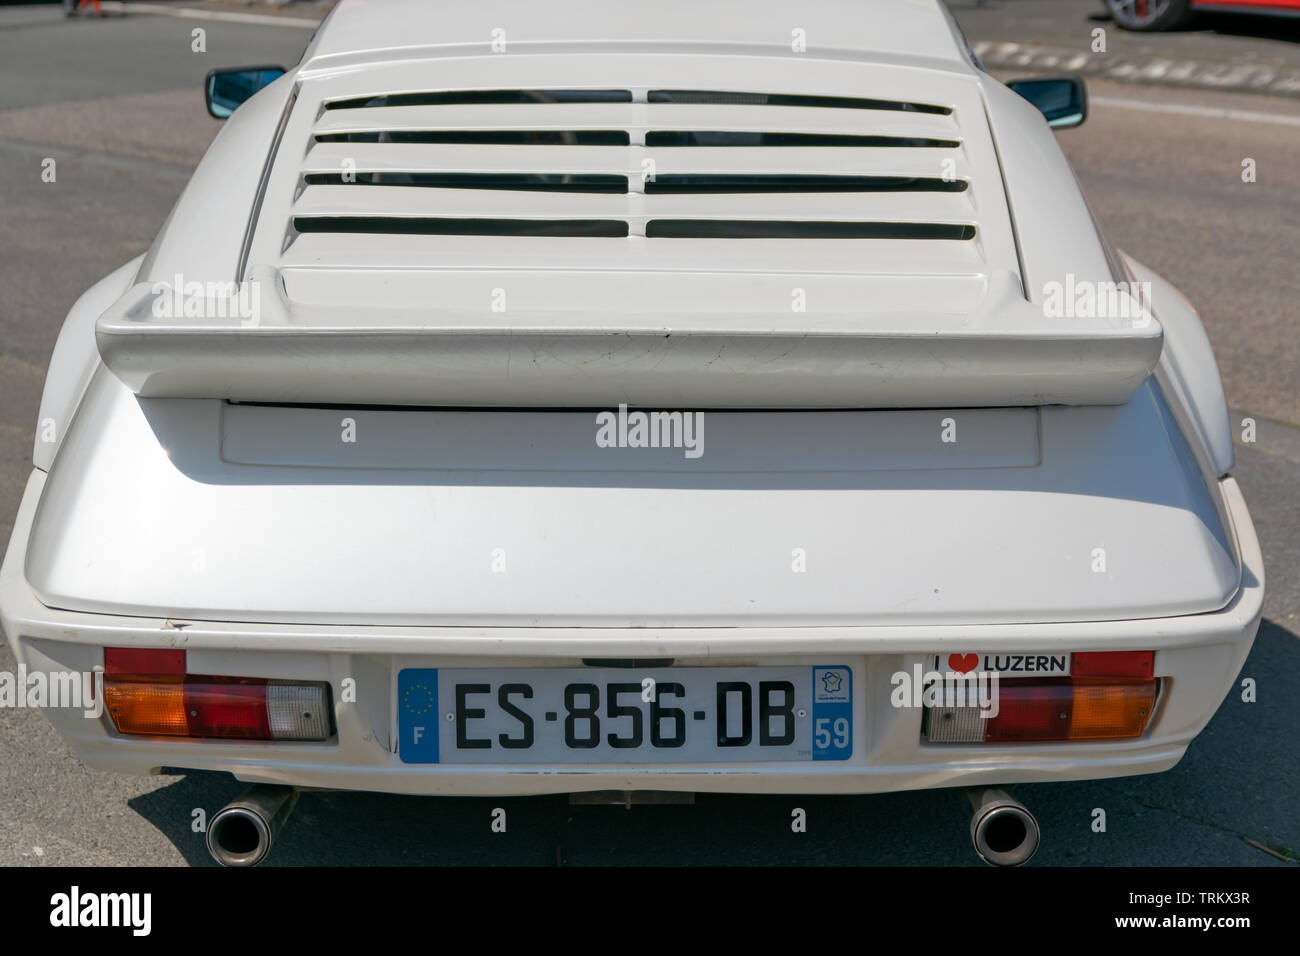 Wattrelos,FRANCE-June 02,2019: Renault Alpine A310 V6 Turbo,rear view,car exhibited at the 7th Retro Car Festival at the Renault Wattrelos Martinoire. Stock Photo